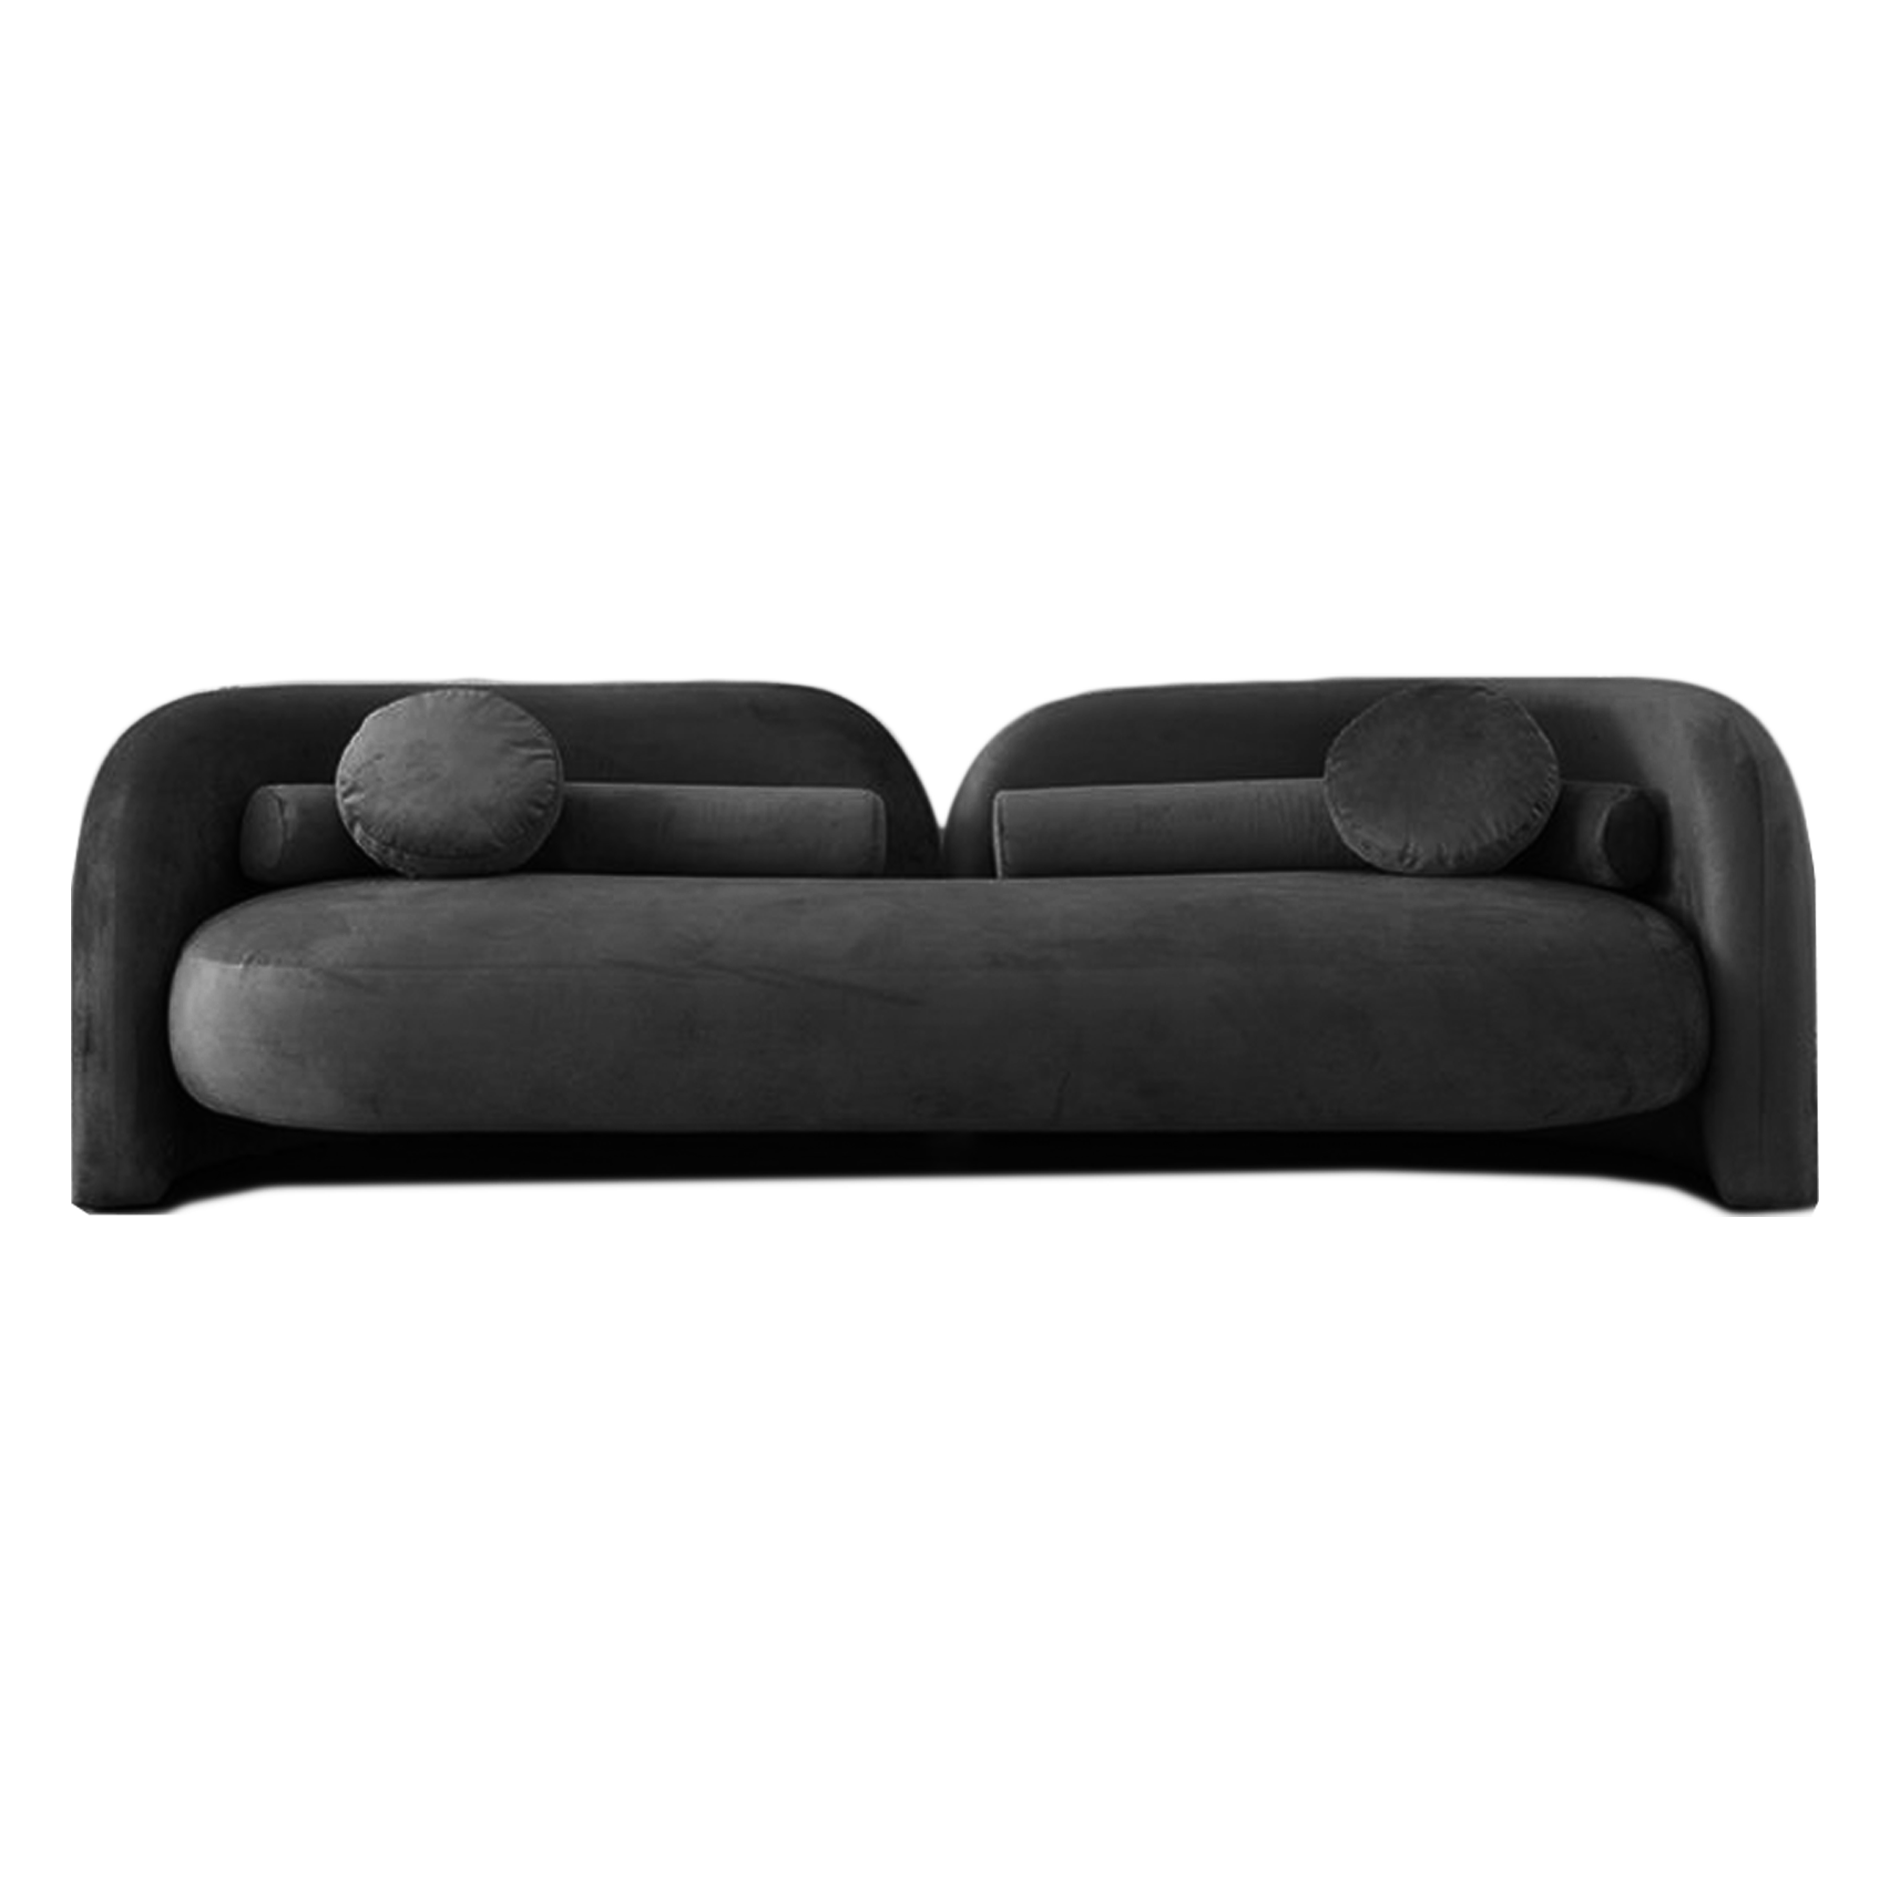 contemporary velvet upholstery sofa in black, featuring deep cushioning and elegant tufted backrest, perfect for luxurious event seating